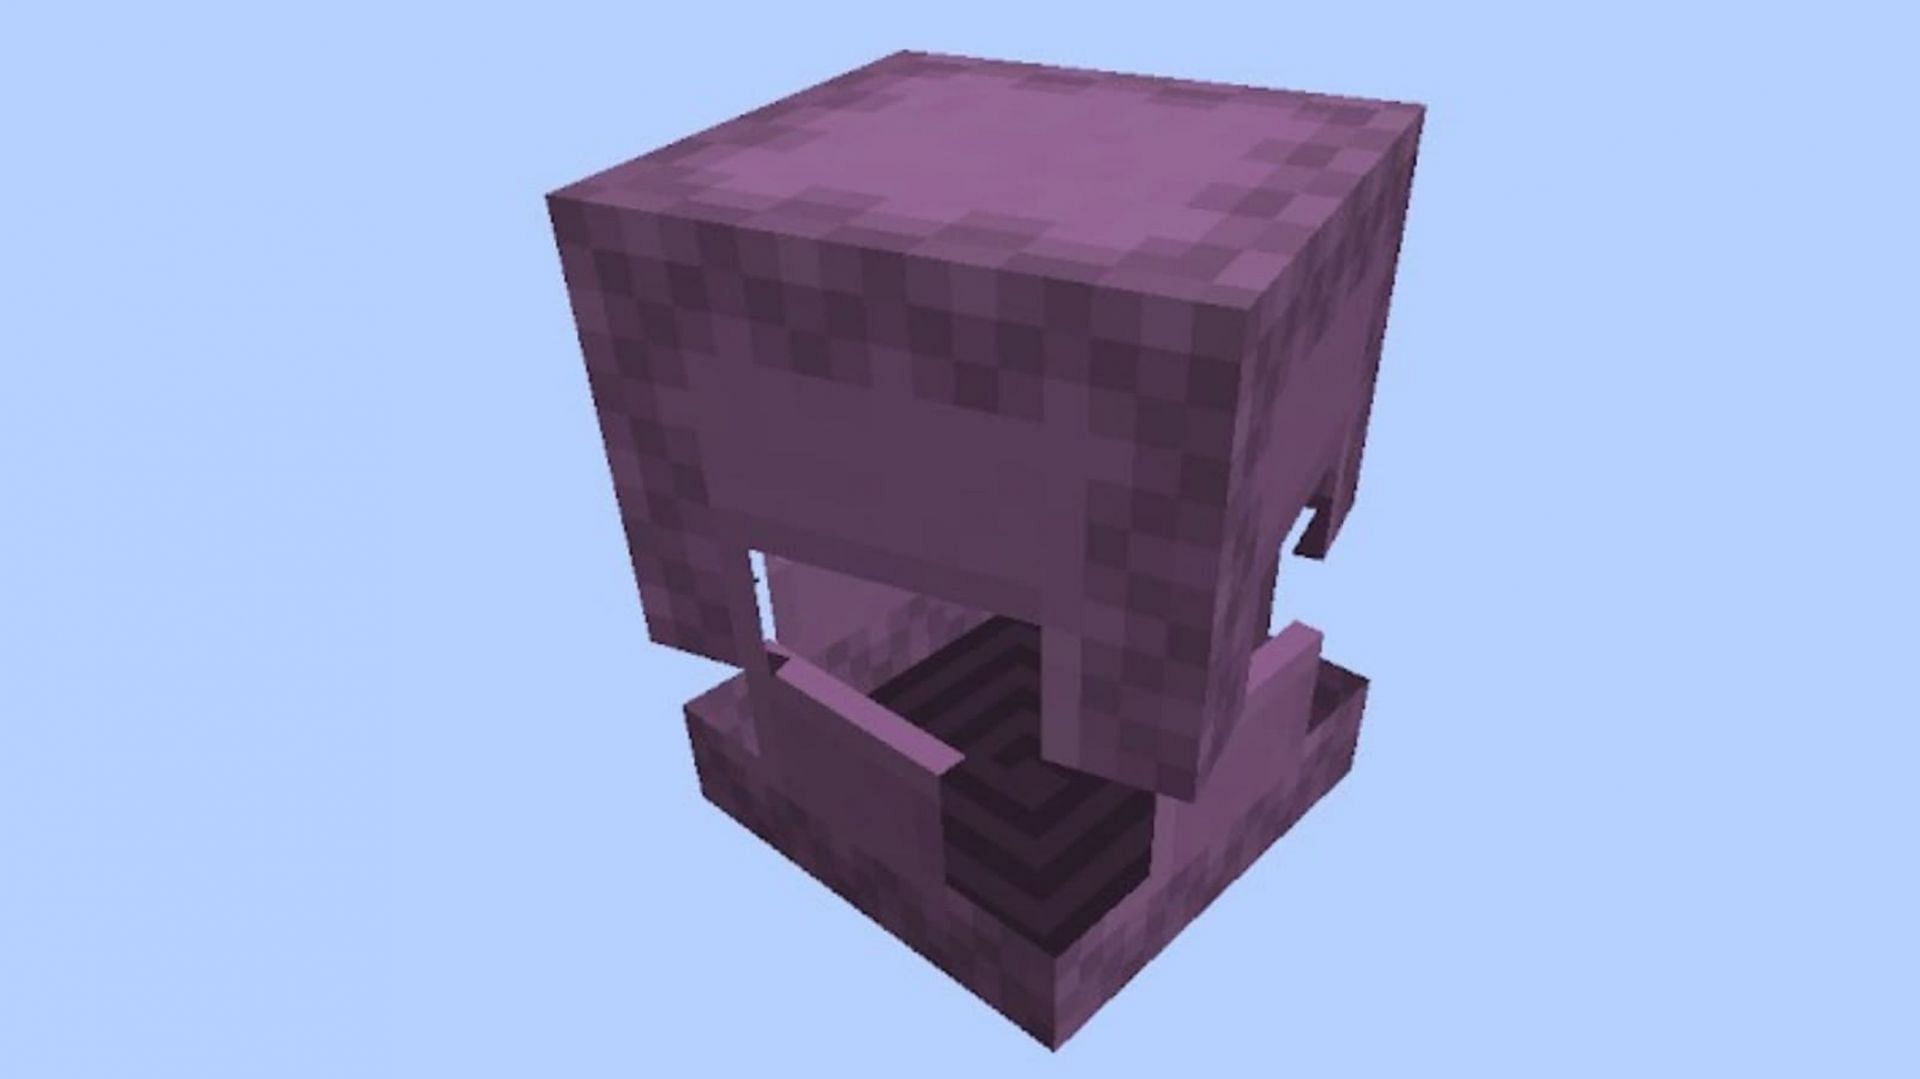 Here's an illustration of the single and double chest. : r/Minecraft